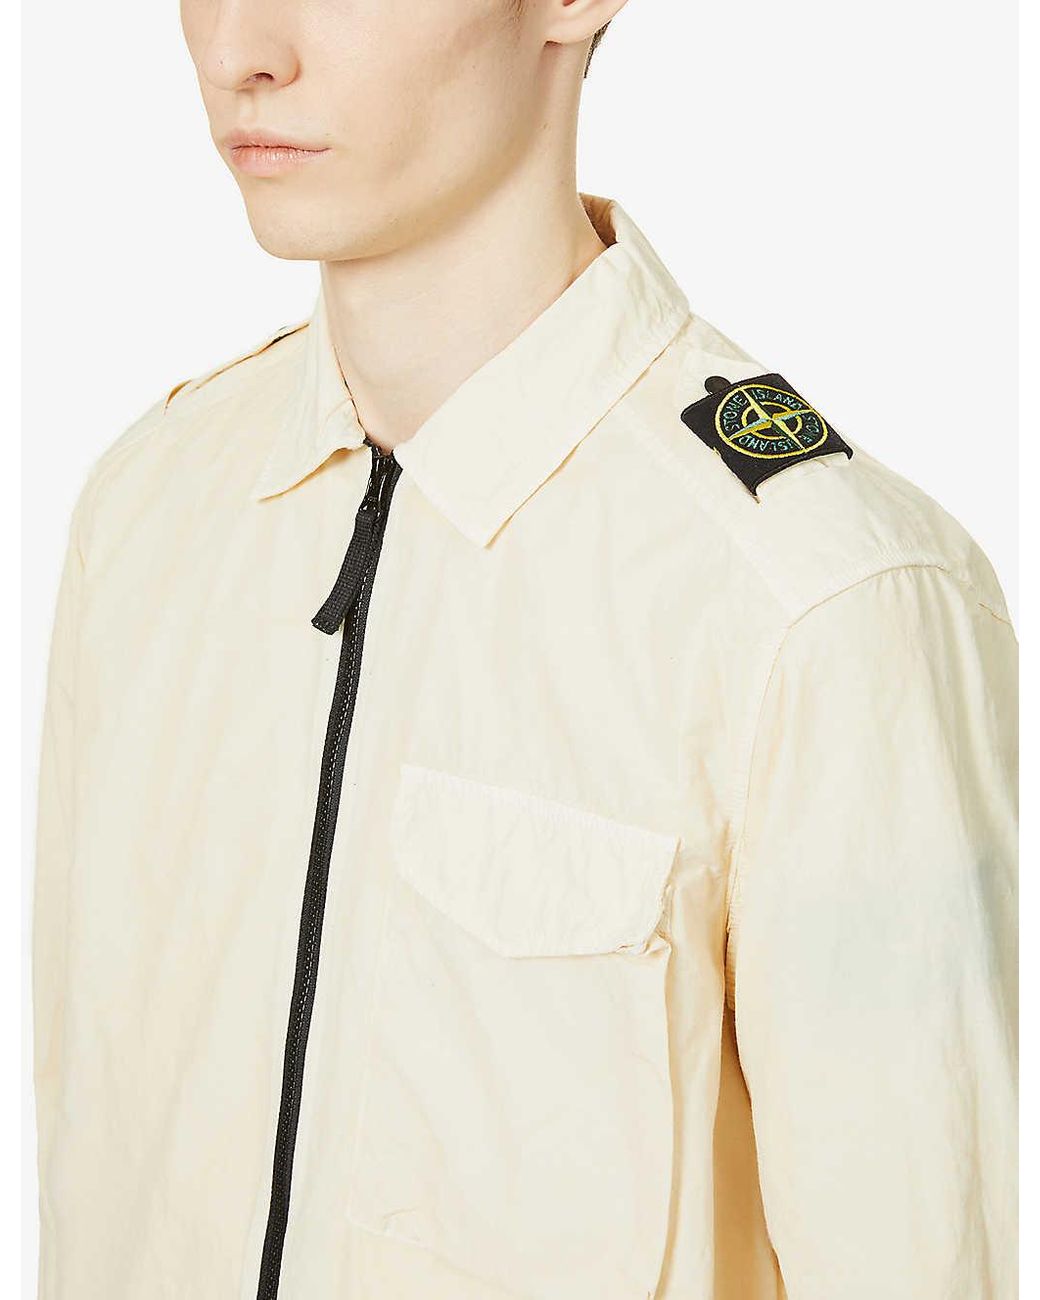 Stone Island Brand-patch Shoulder-epaulette Woven Jacket in Natural for Men  | Lyst